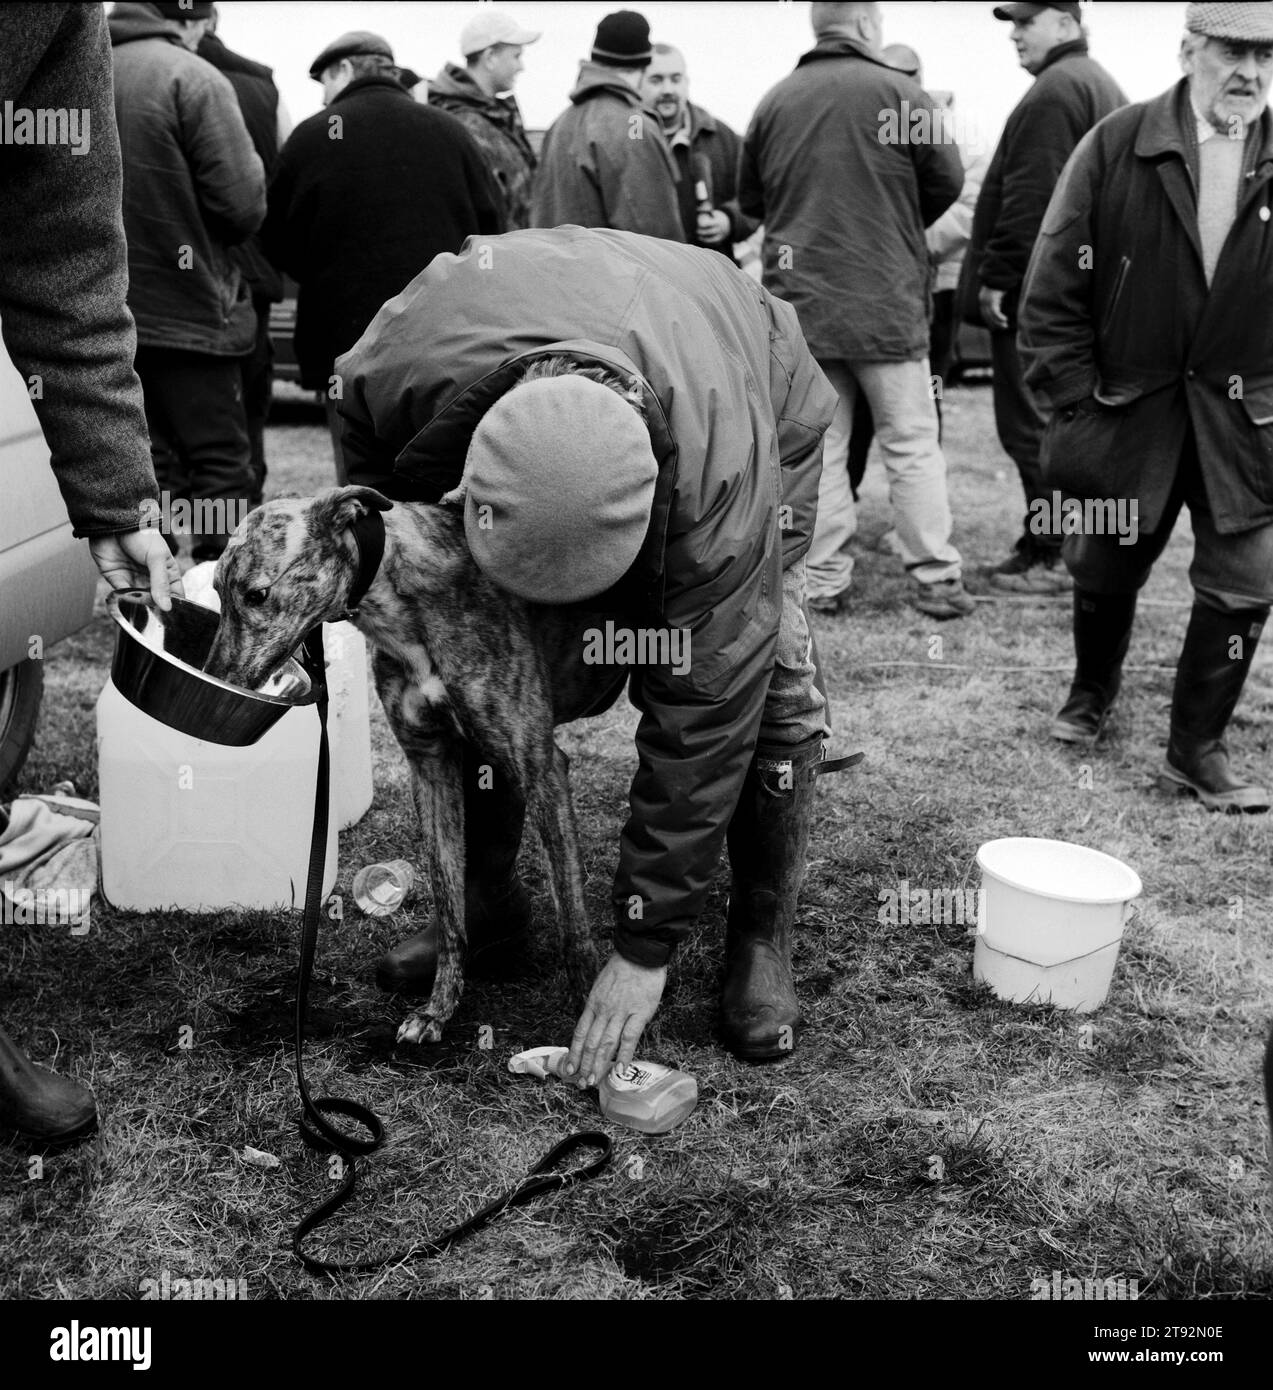 Hare Coursing. A trainer rubs down one of his greyhounds and its given something to eat at the end of the Waterloo Cup. Near Altcar, Lancashire 2002 2000s UK HOMER SYKES Stock Photo